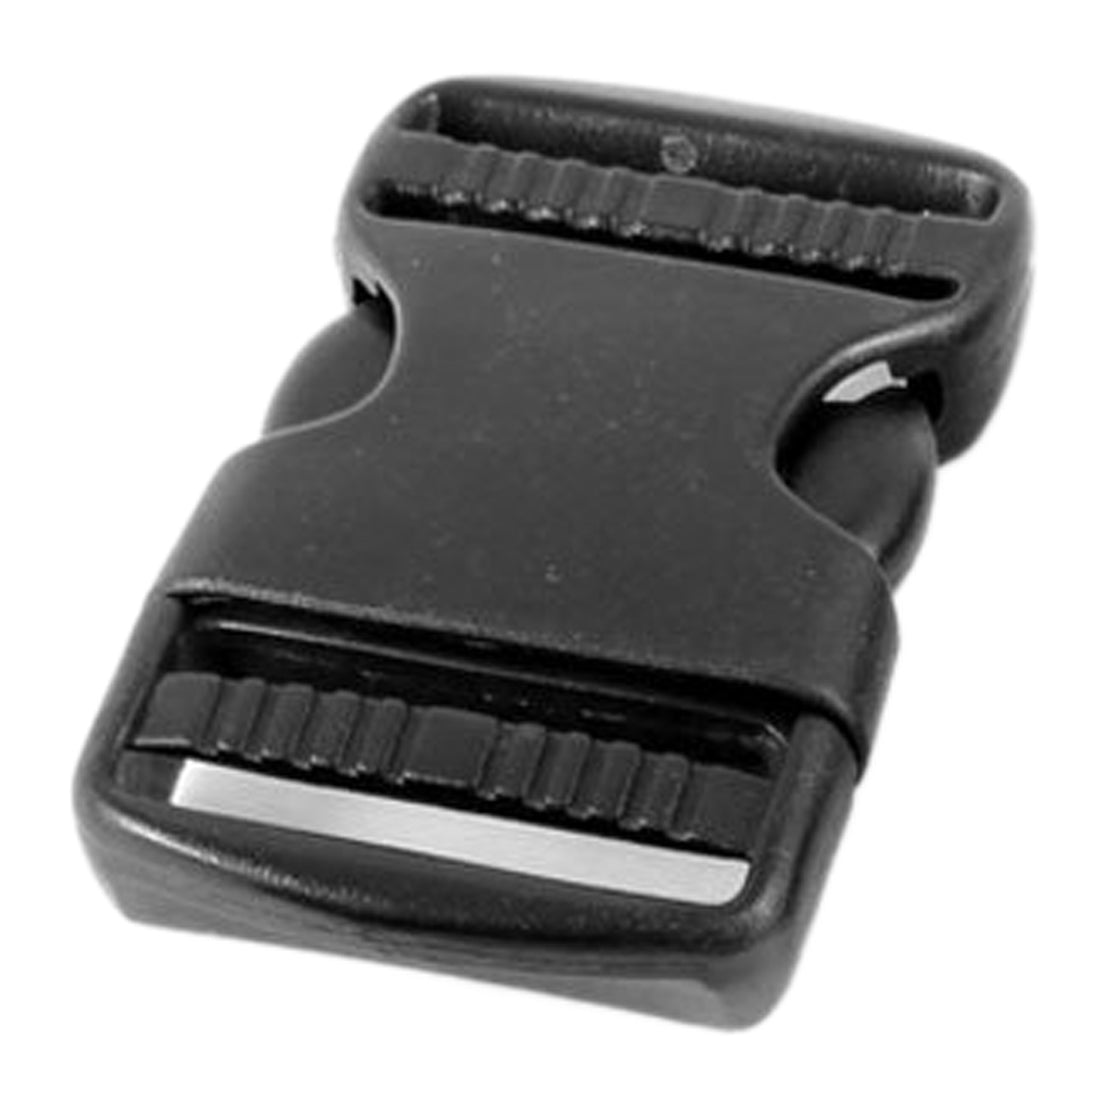 Curved Plastic Side Quick Release Buckle for Bag 5 Pcs Black - ebowsos